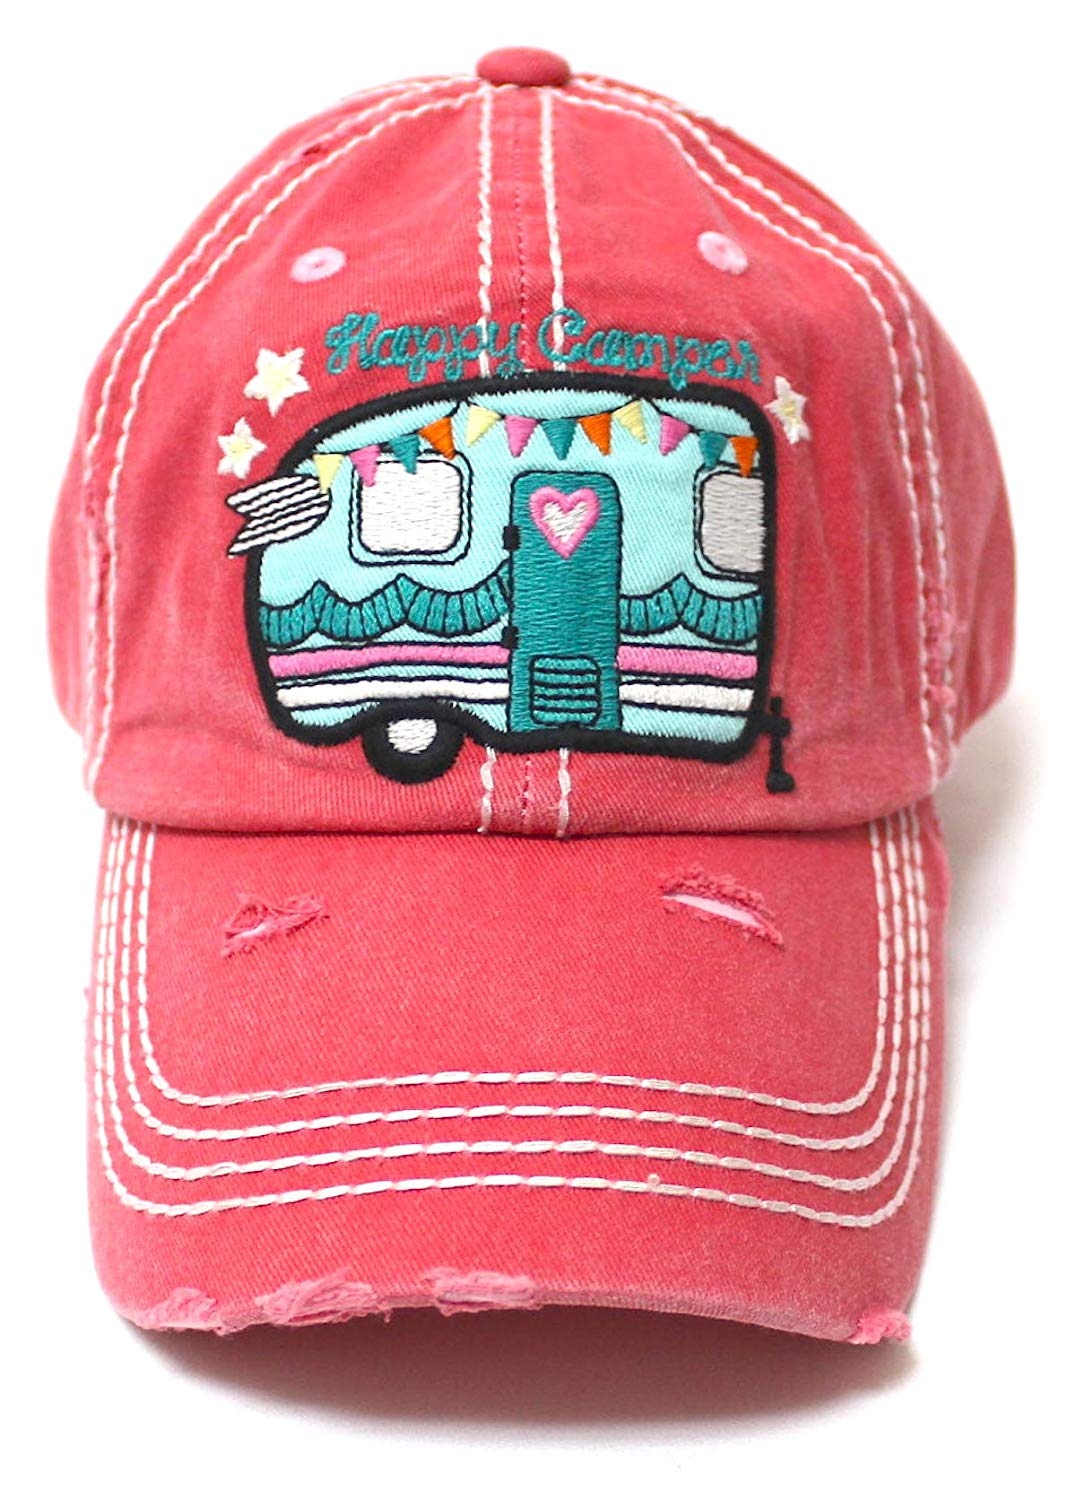 Camping Ballcap Happy Camper RV Truck, Hearts & Stars Patch Embroidery Hat, Rose Pink - Caps 'N Vintage 